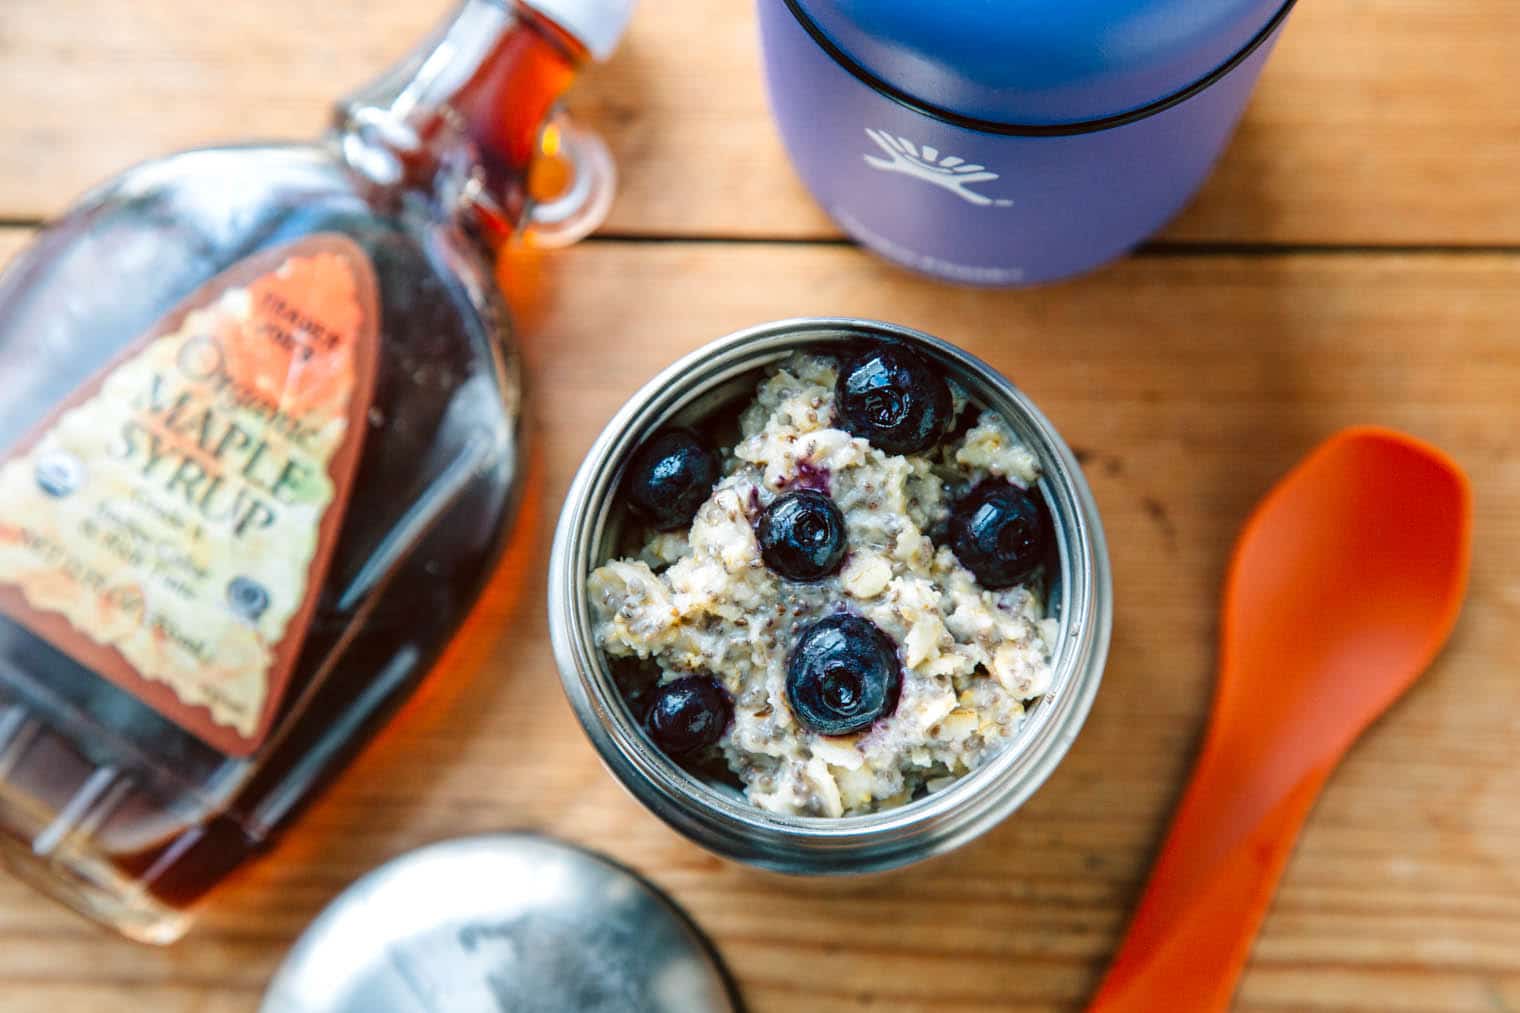 Oatmeal topped with blueberries inside a insulated food jar